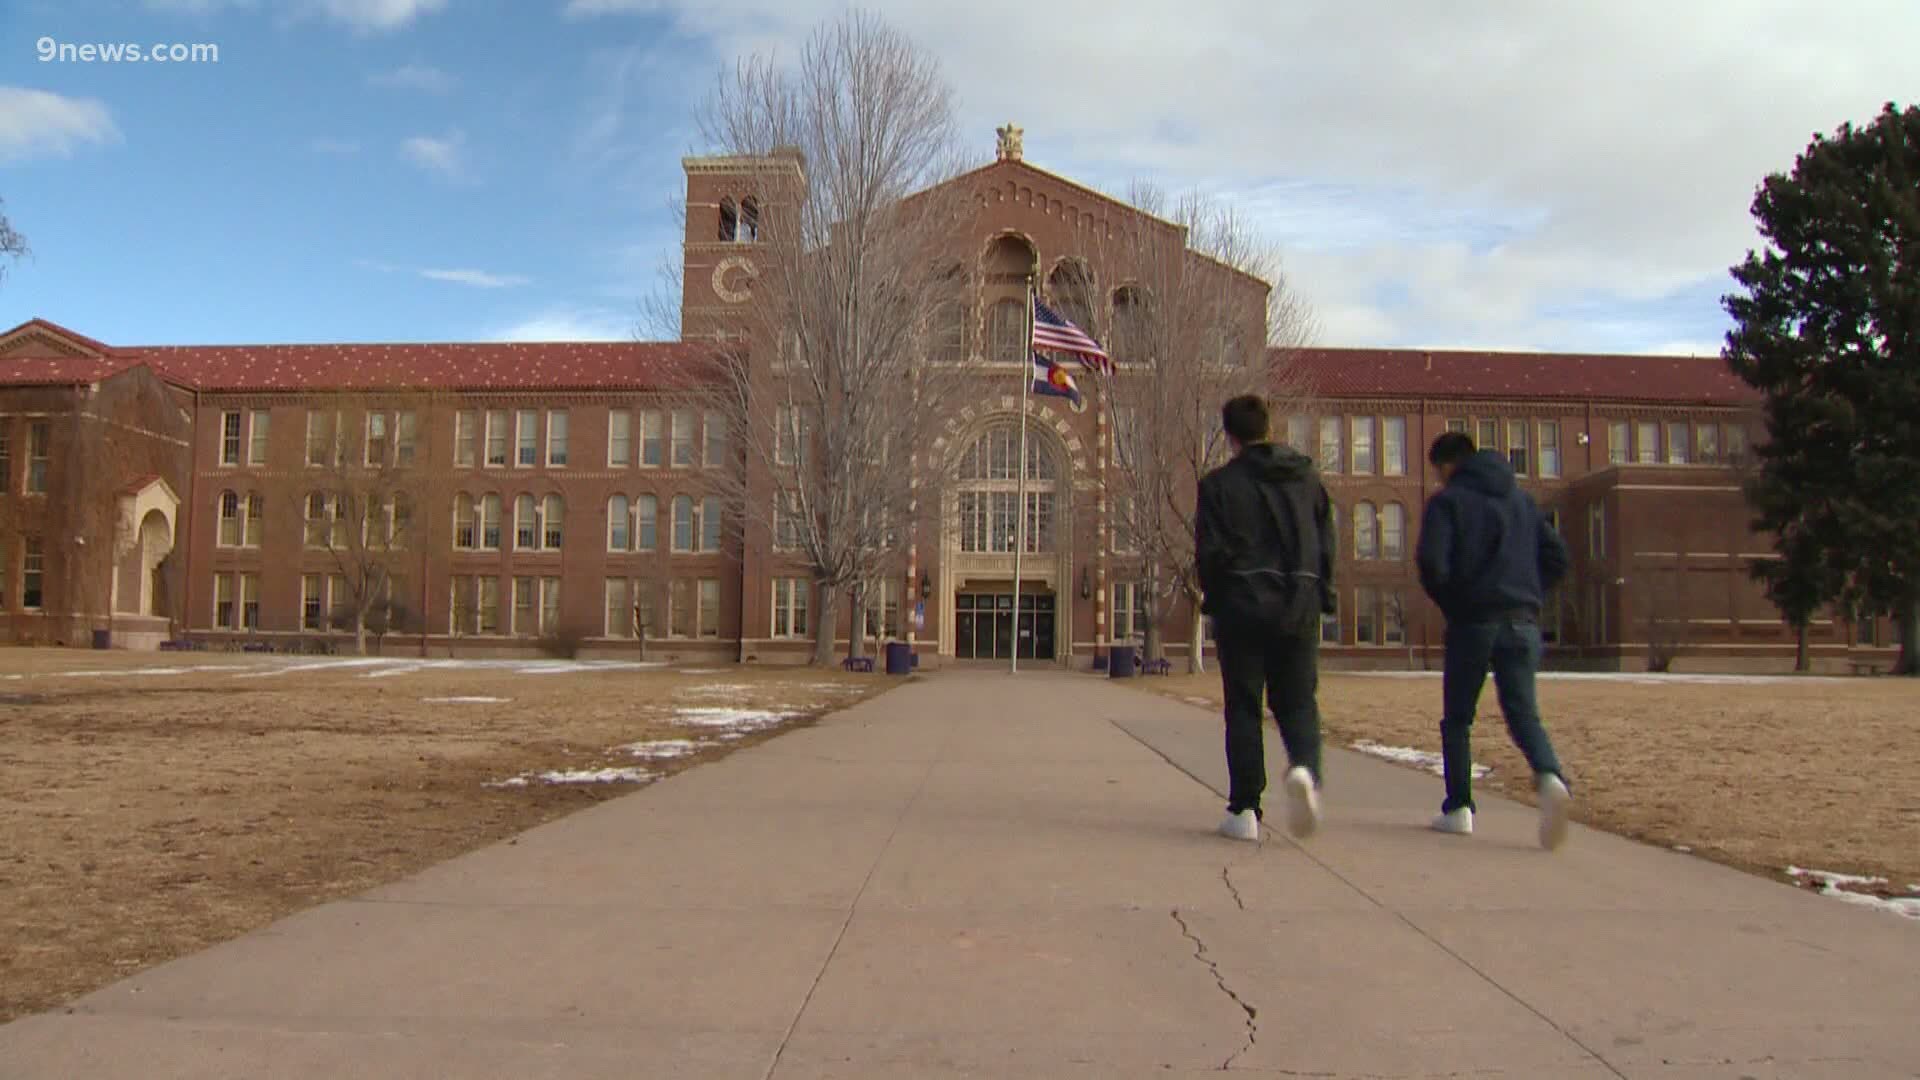 The Denver Public Schools board voted unanimously to make the change Thursday night.